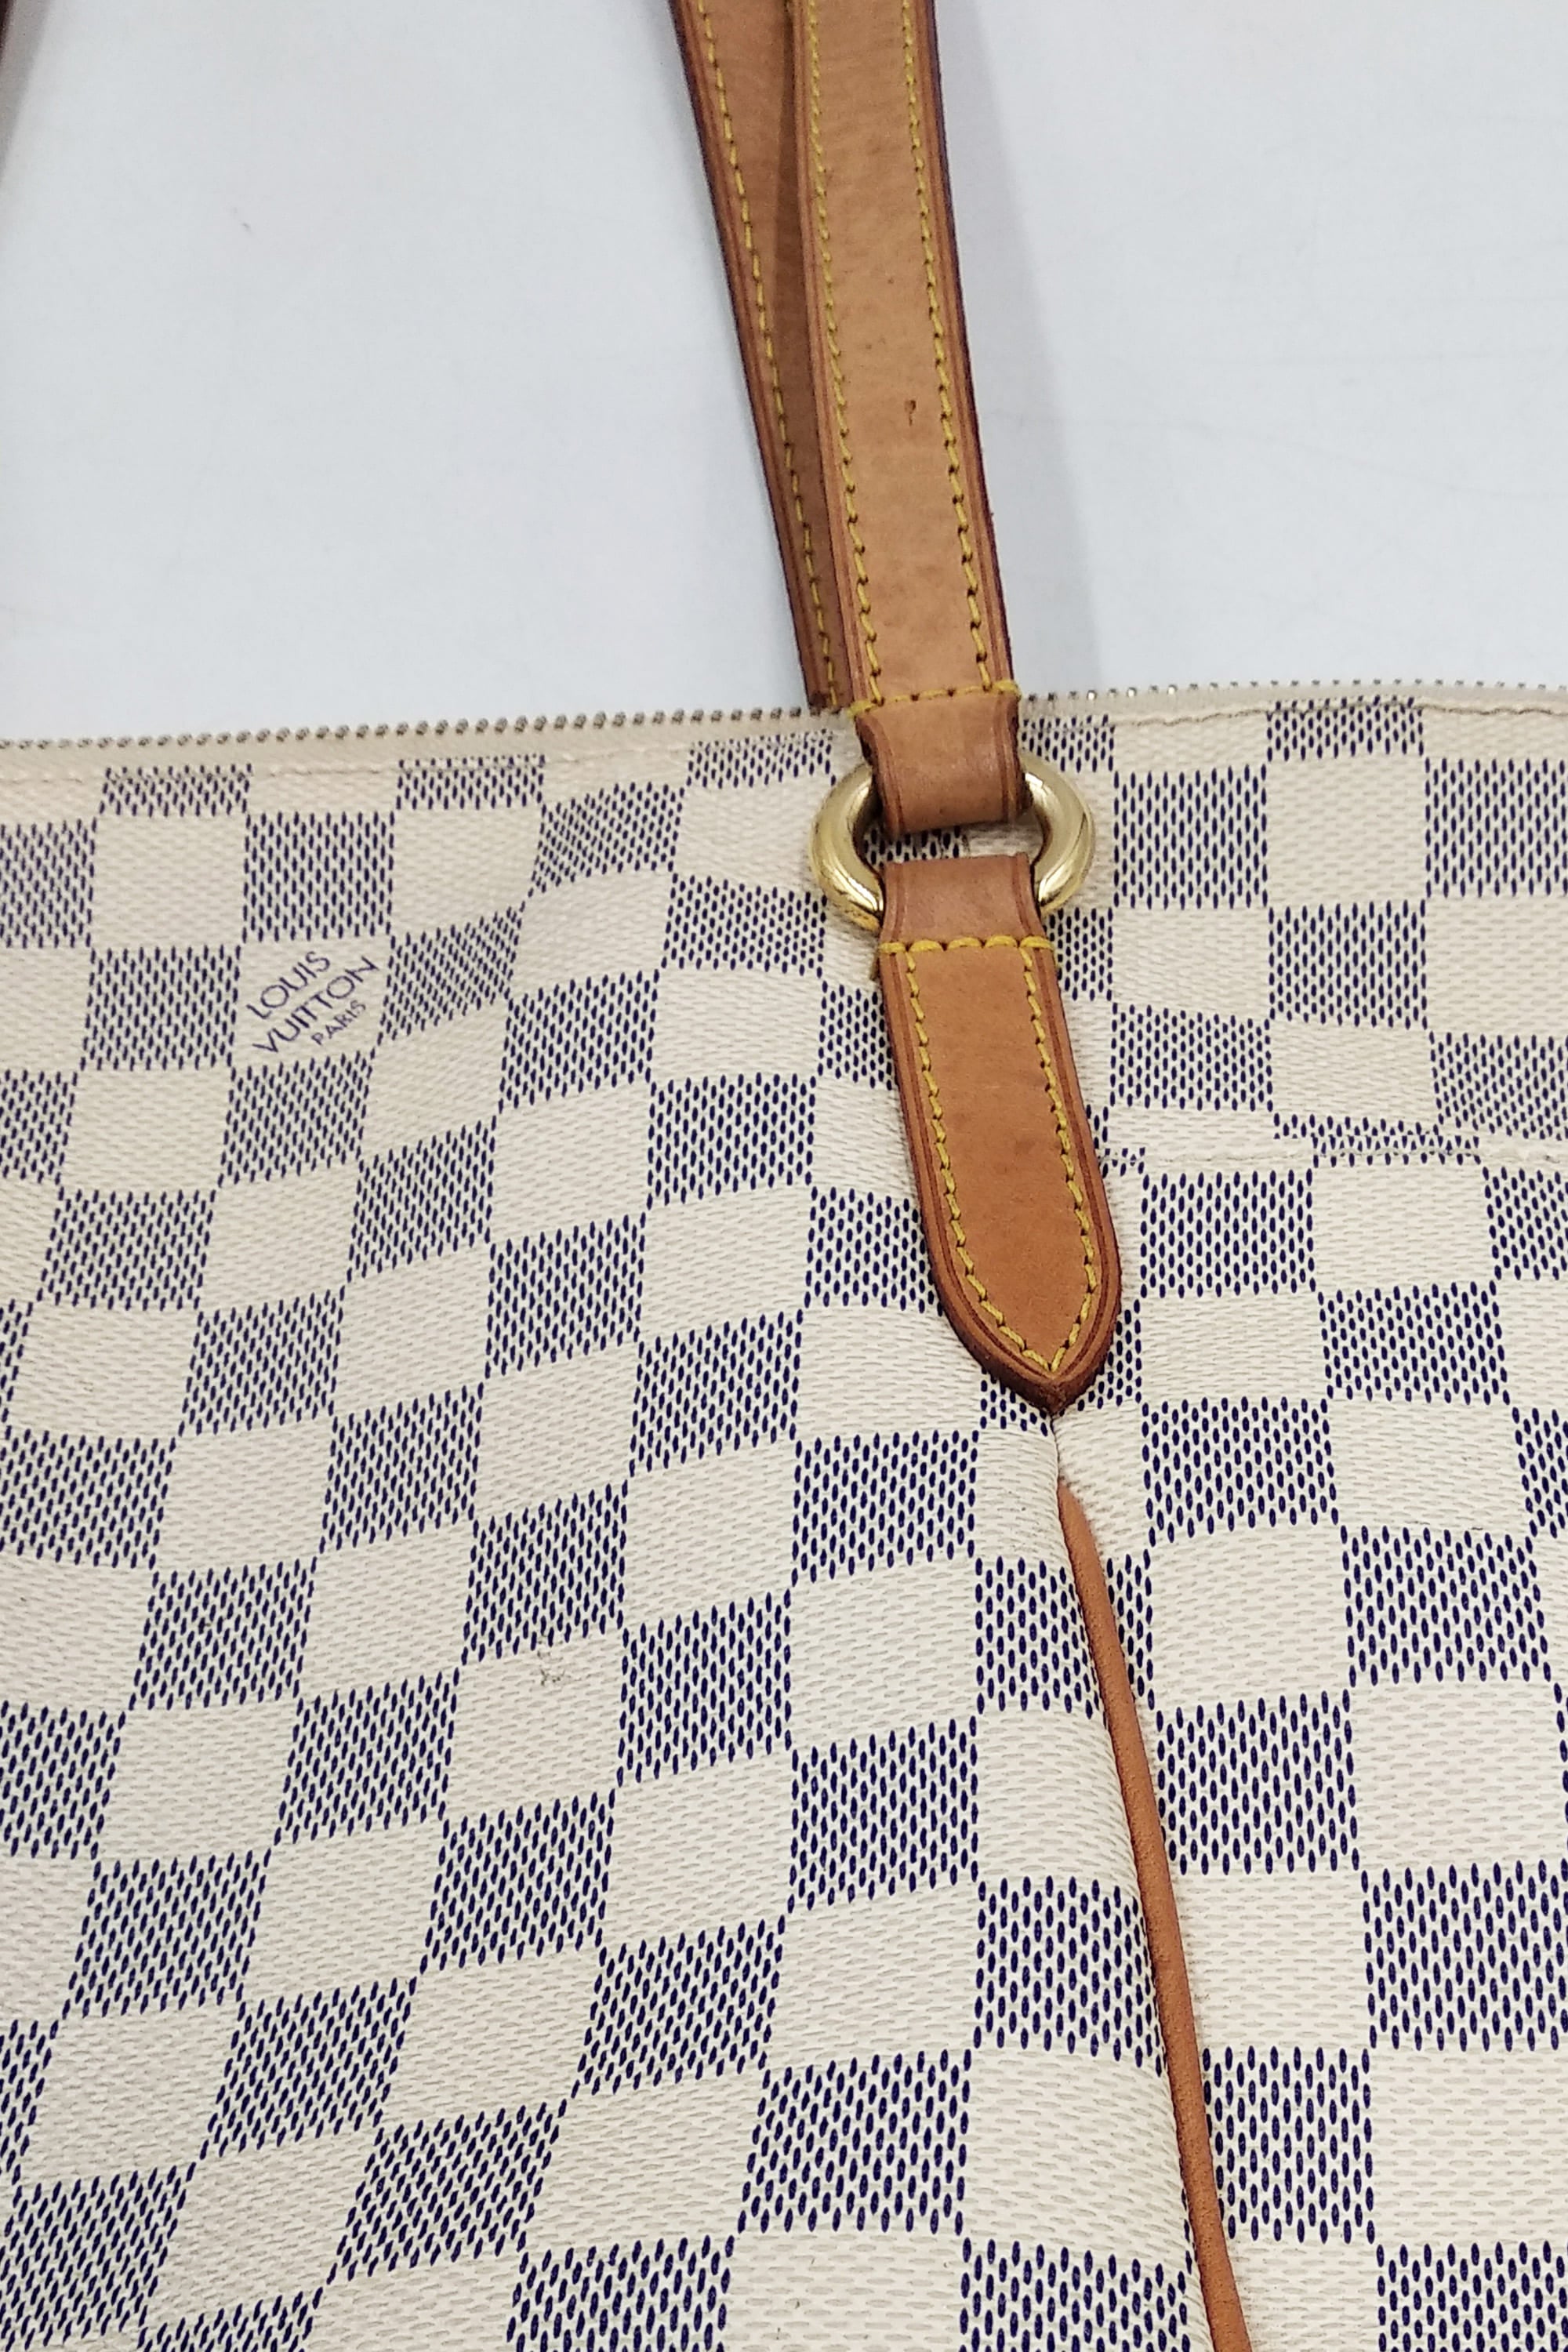 Louis Vuitton Damier Azur Totally PM Tote Bag 83lk67s For Sale at 1stDibs